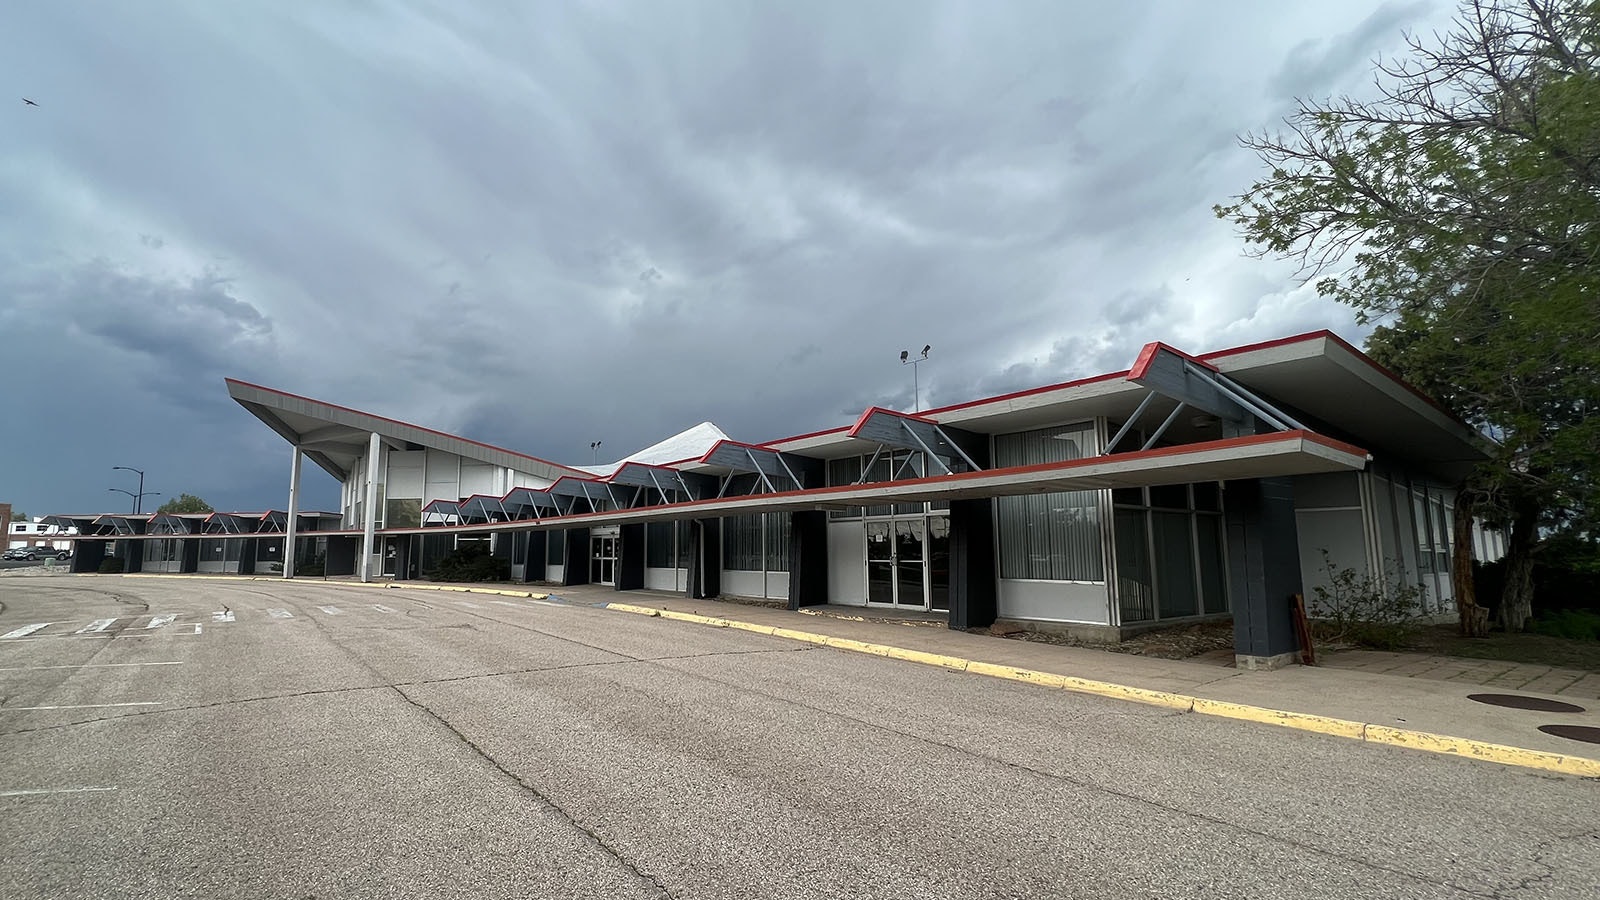 The old Cheyenne Airport Terminal building was built to resemble the old TWA terminal in New York at what is now John F. Kennedy International Airport.